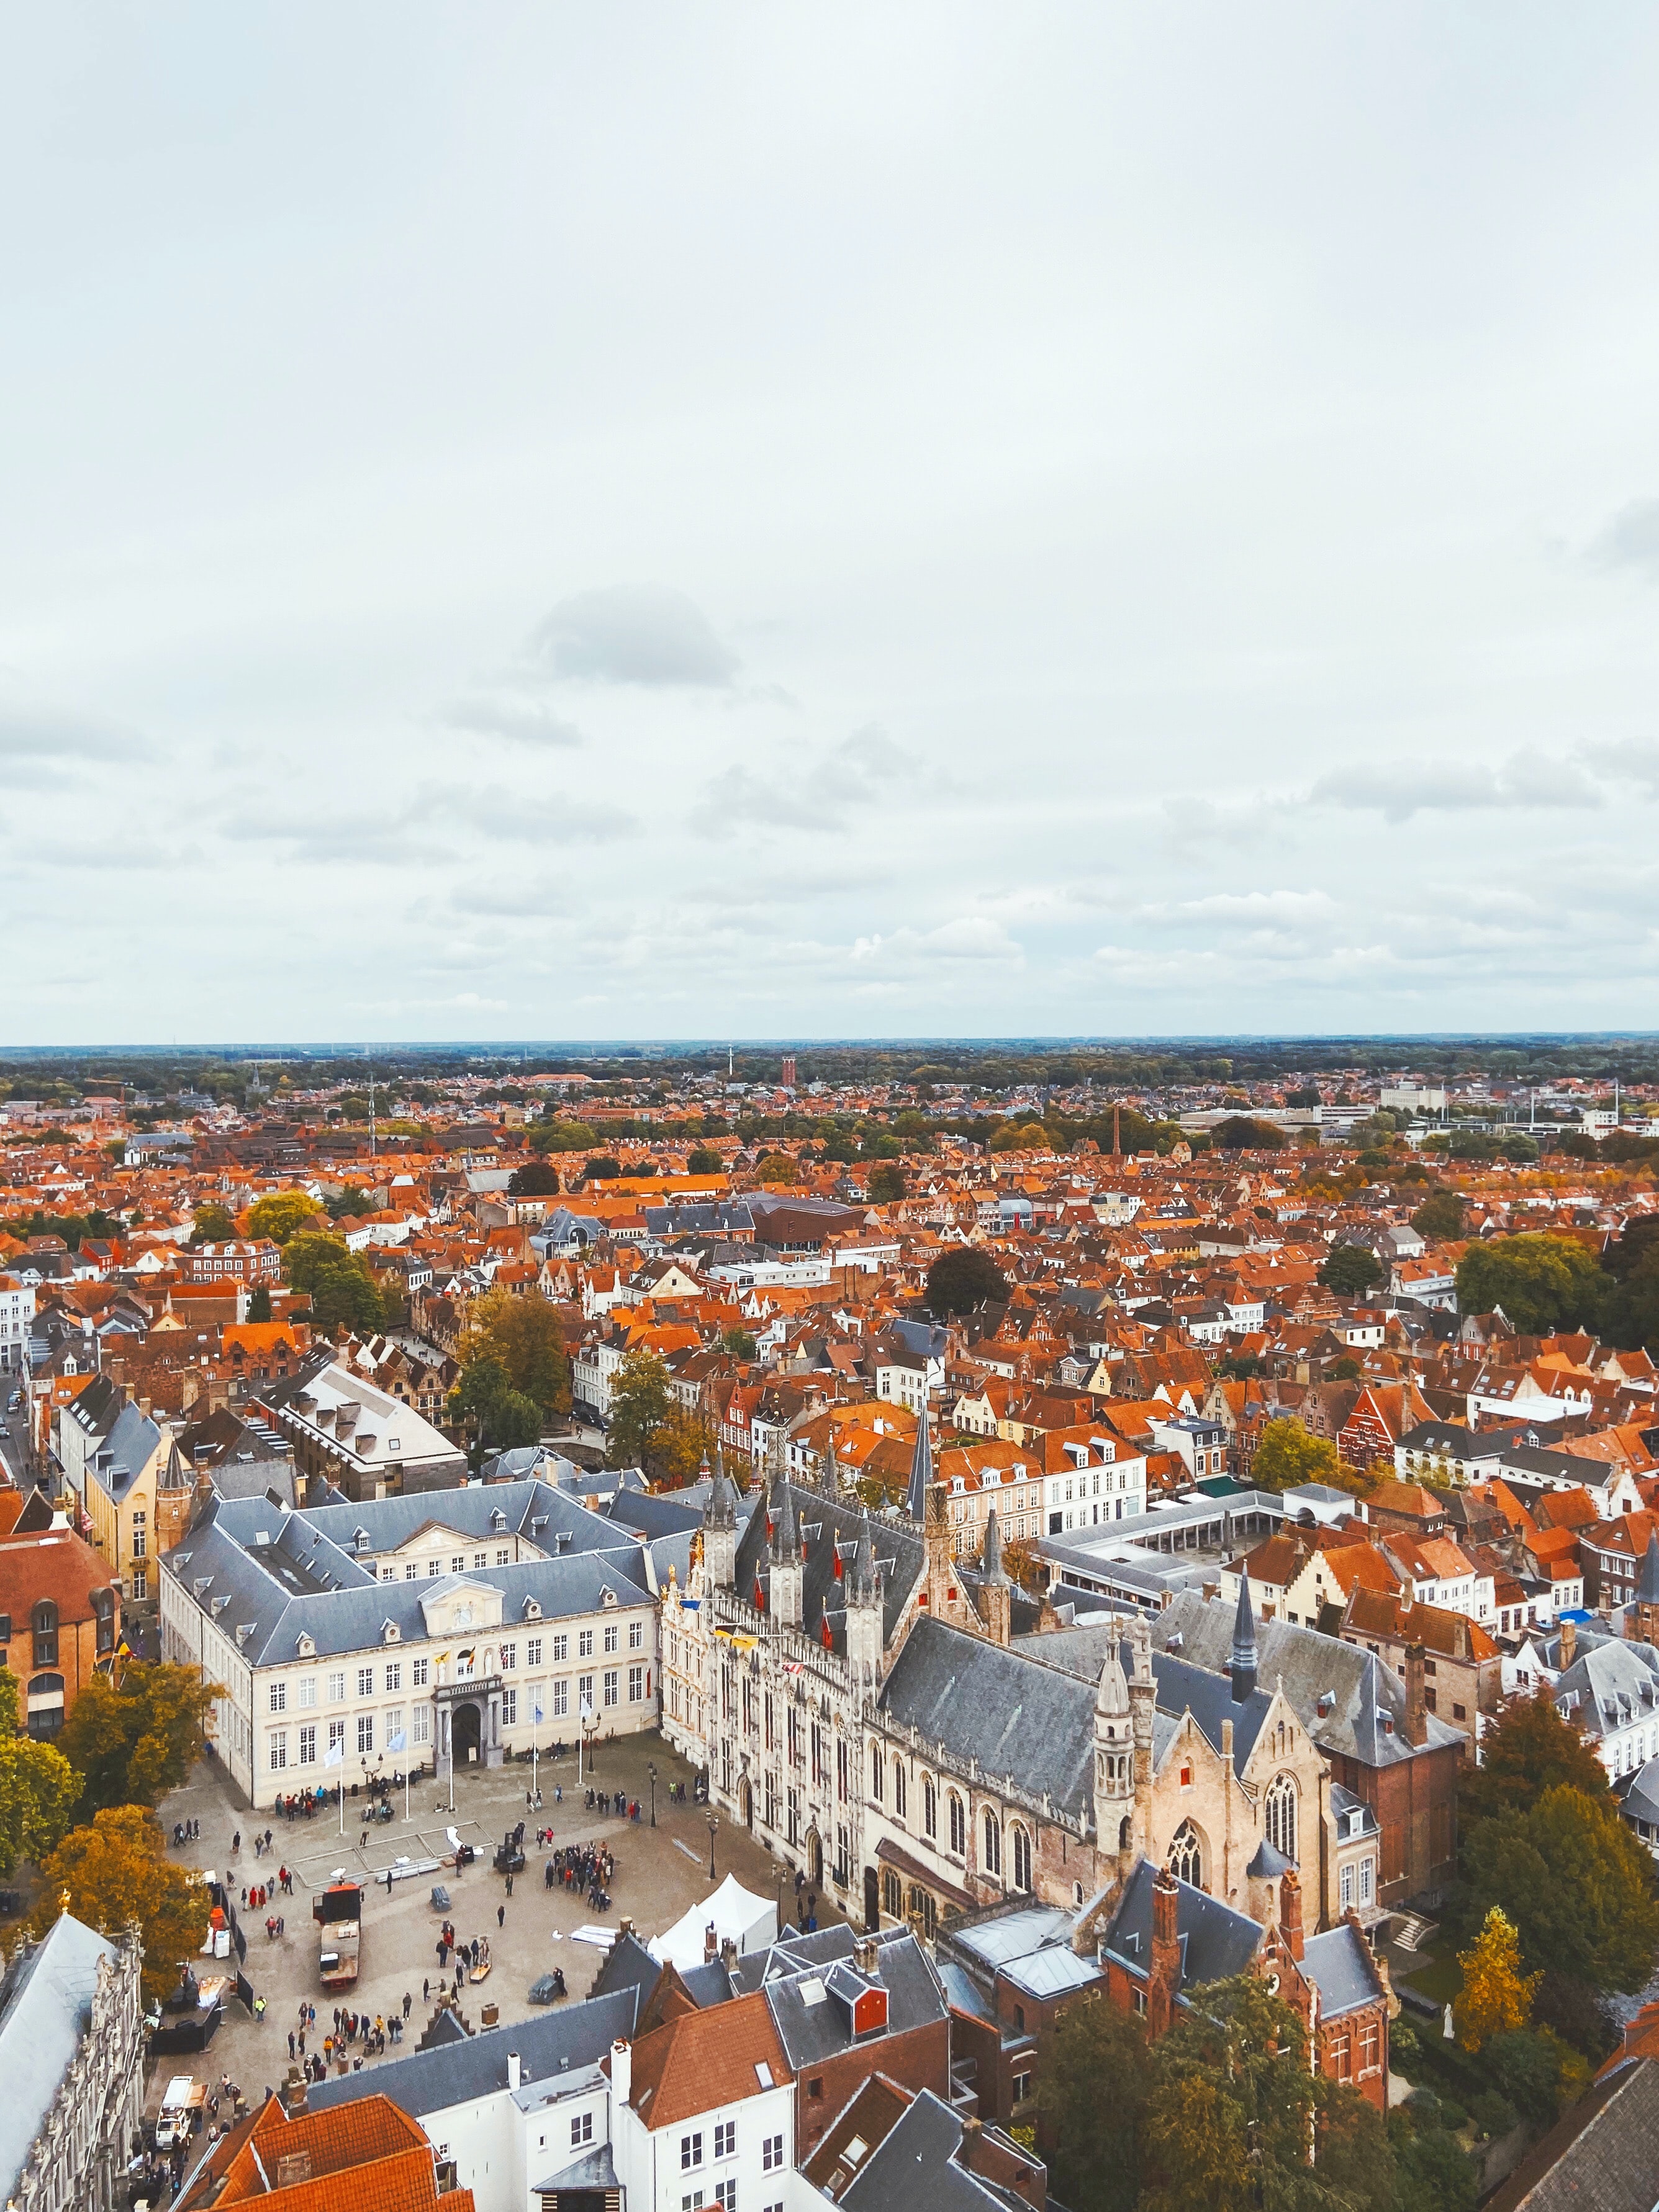 belgium, cities, architecture, city, building, roof, roofs, bruges